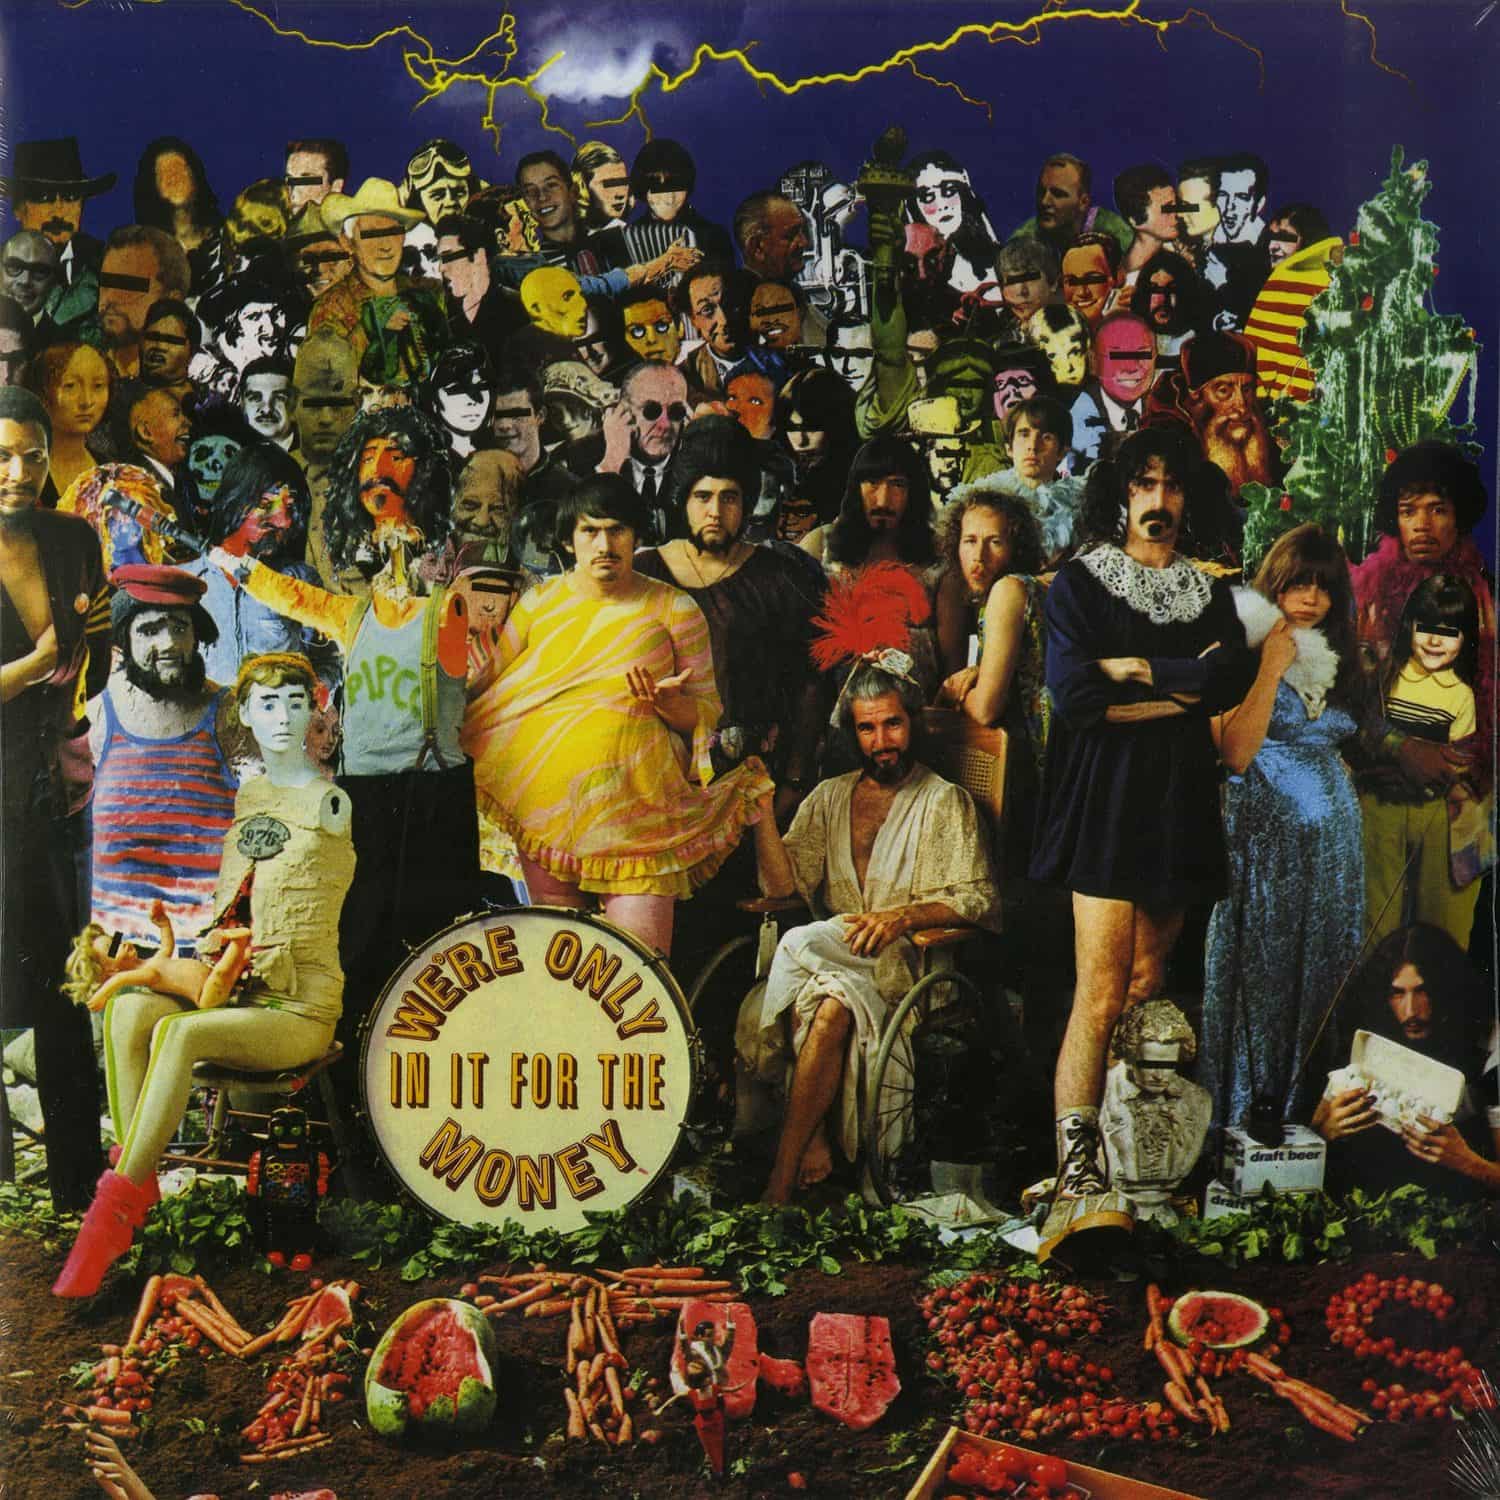 Frank Zappa and The Mothers of Invention - WE RE ONLY IN IT FOR THE MONEY 